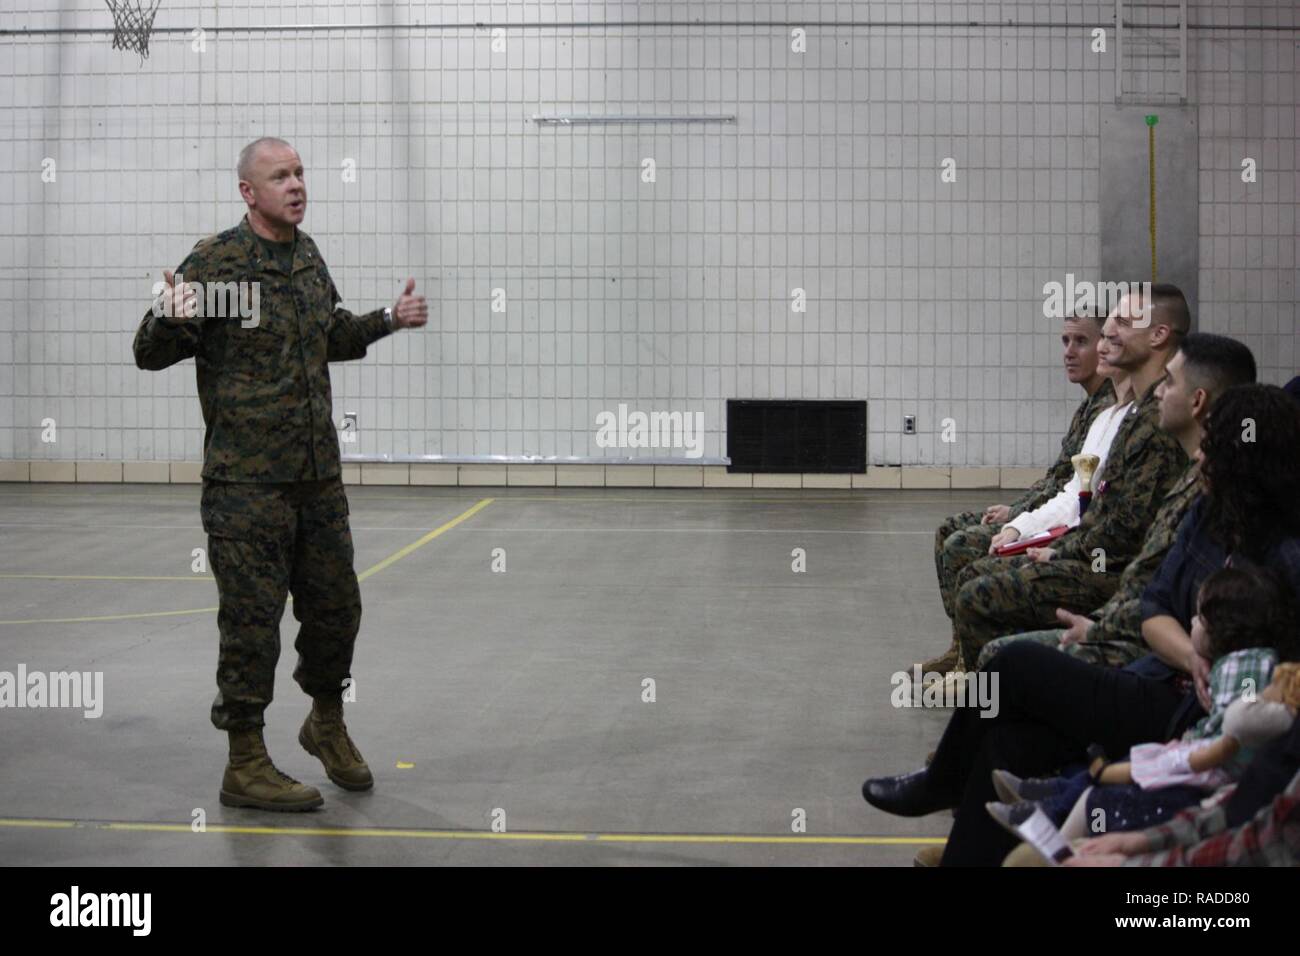 Brigadier General Michael F. Fahey, Commanding Officer of Force Headquarters Group (FHG), addresses attendees during 4th Law Enforcement Battalion’s change of command ceremony on January 21, 2017, at the Battalion’s headquarters in St. Paul, Minnesota.  During that change of command ceremony, Col Michael Bracewell (seated, third from left) relinquished command of 4th LEB to incoming commanding officer LtCol Johnny Gutierrez (seated, fourth from left).    4th Law Enforcement Battalion (4th LEB), a subordinate unit of FHG, is a reserve Marine Corps military police battalion.  Headquartered in St Stock Photo